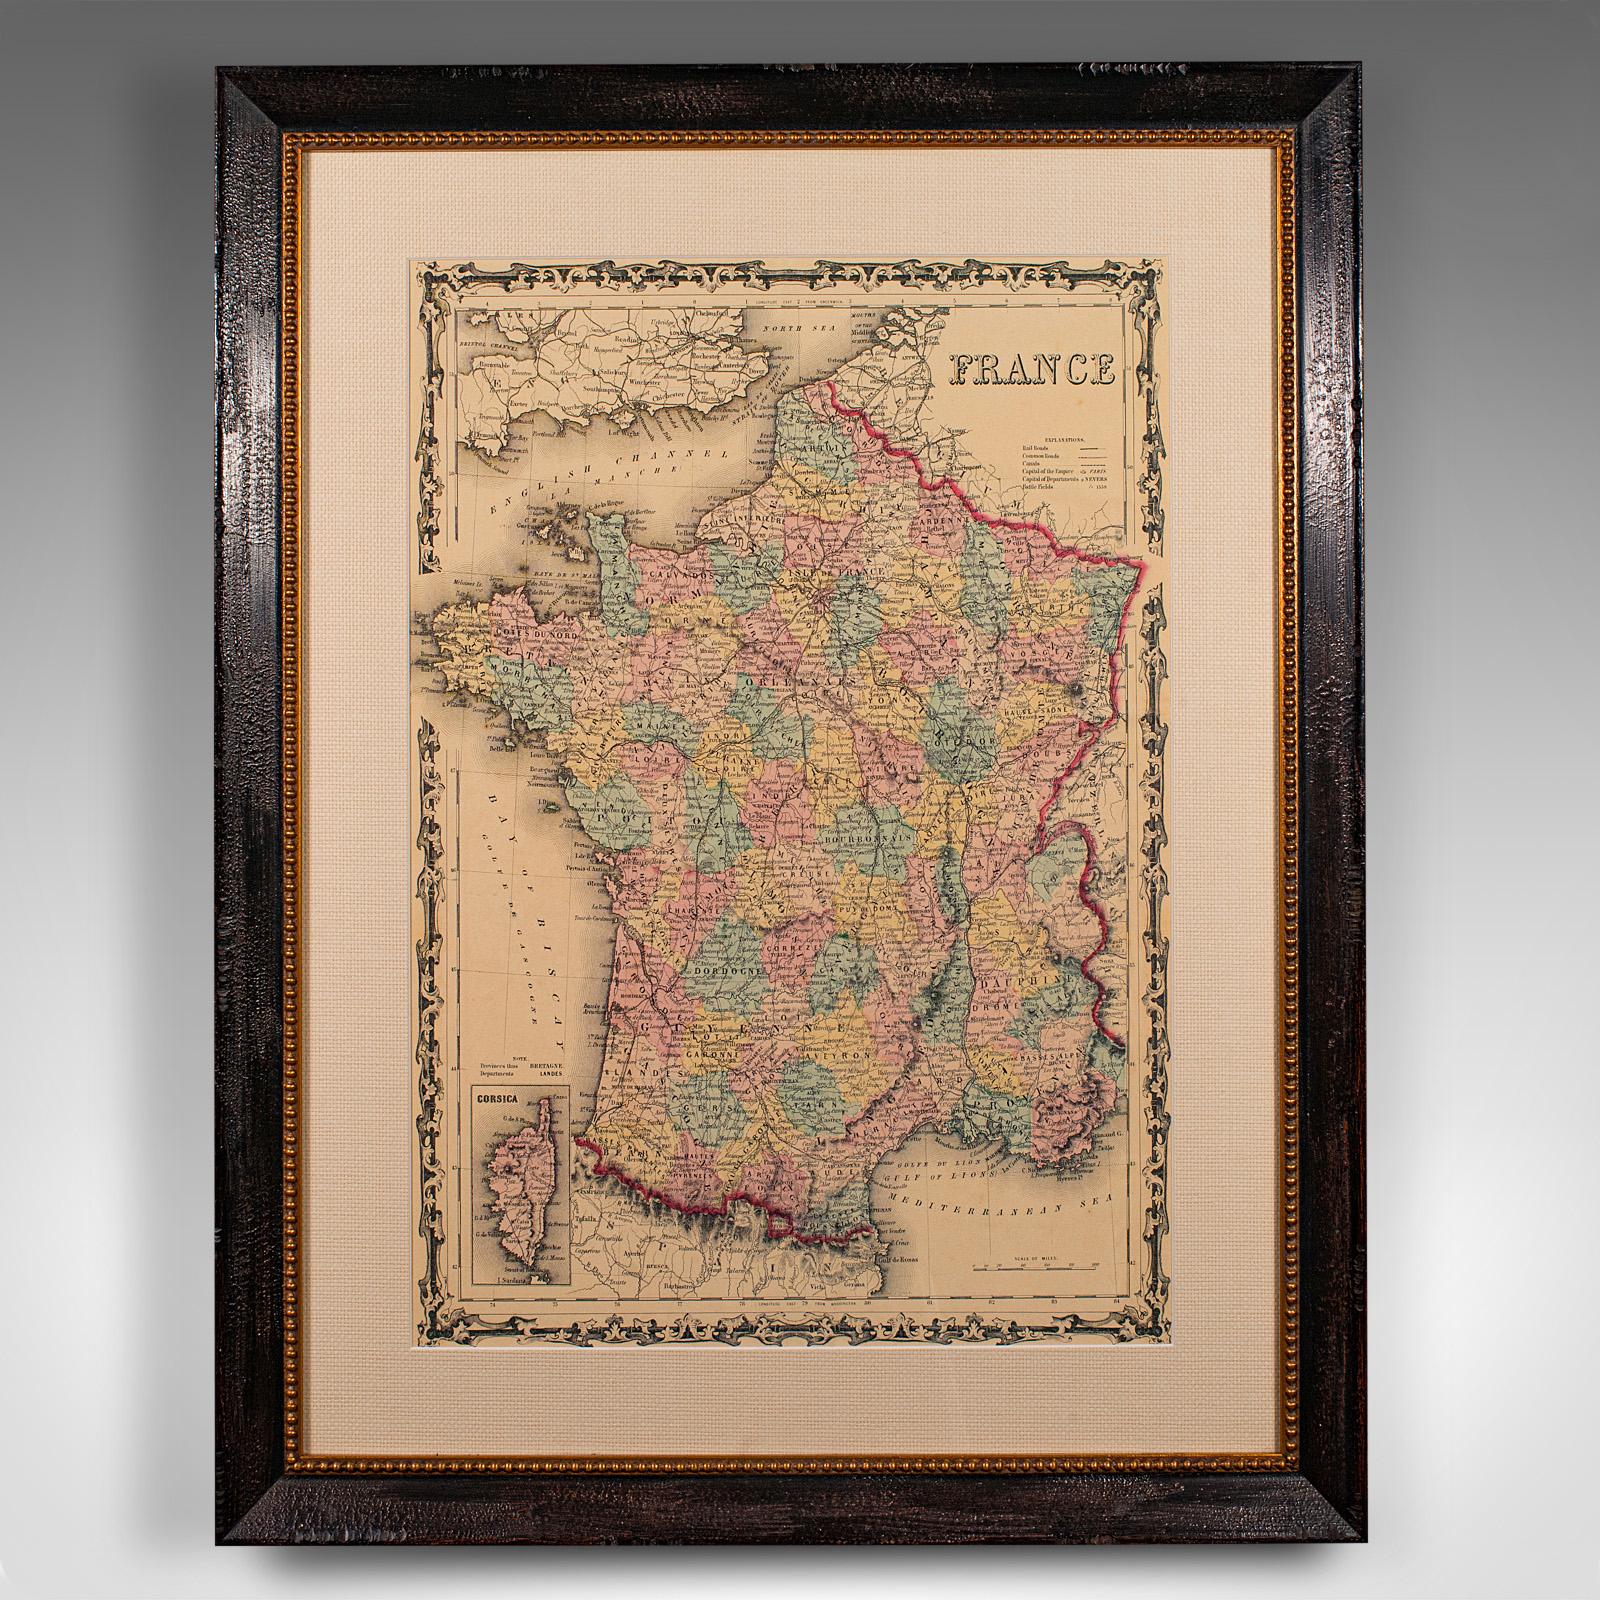 This is a large vintage map of France. A Continental, framed example of historical cartography, dating to the late 20th century, circa 1970.

Fascinating map of France and the island of Corsica
Displays a desirable aged patina throughout
Ebonised